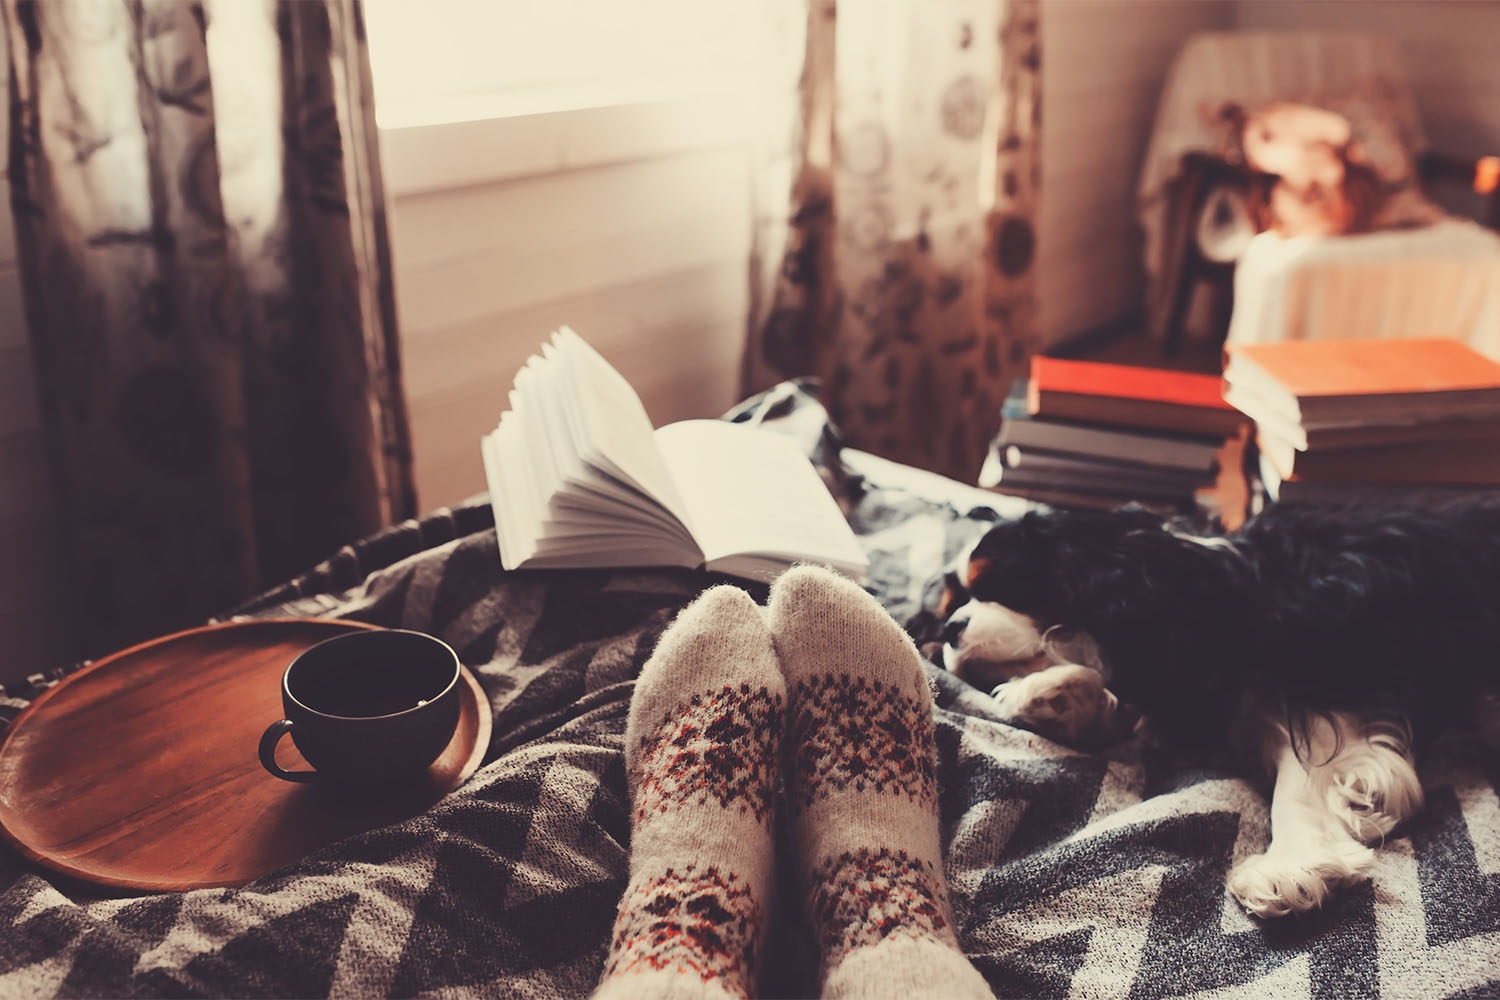 Hygge's about being centered, not just cozy socks